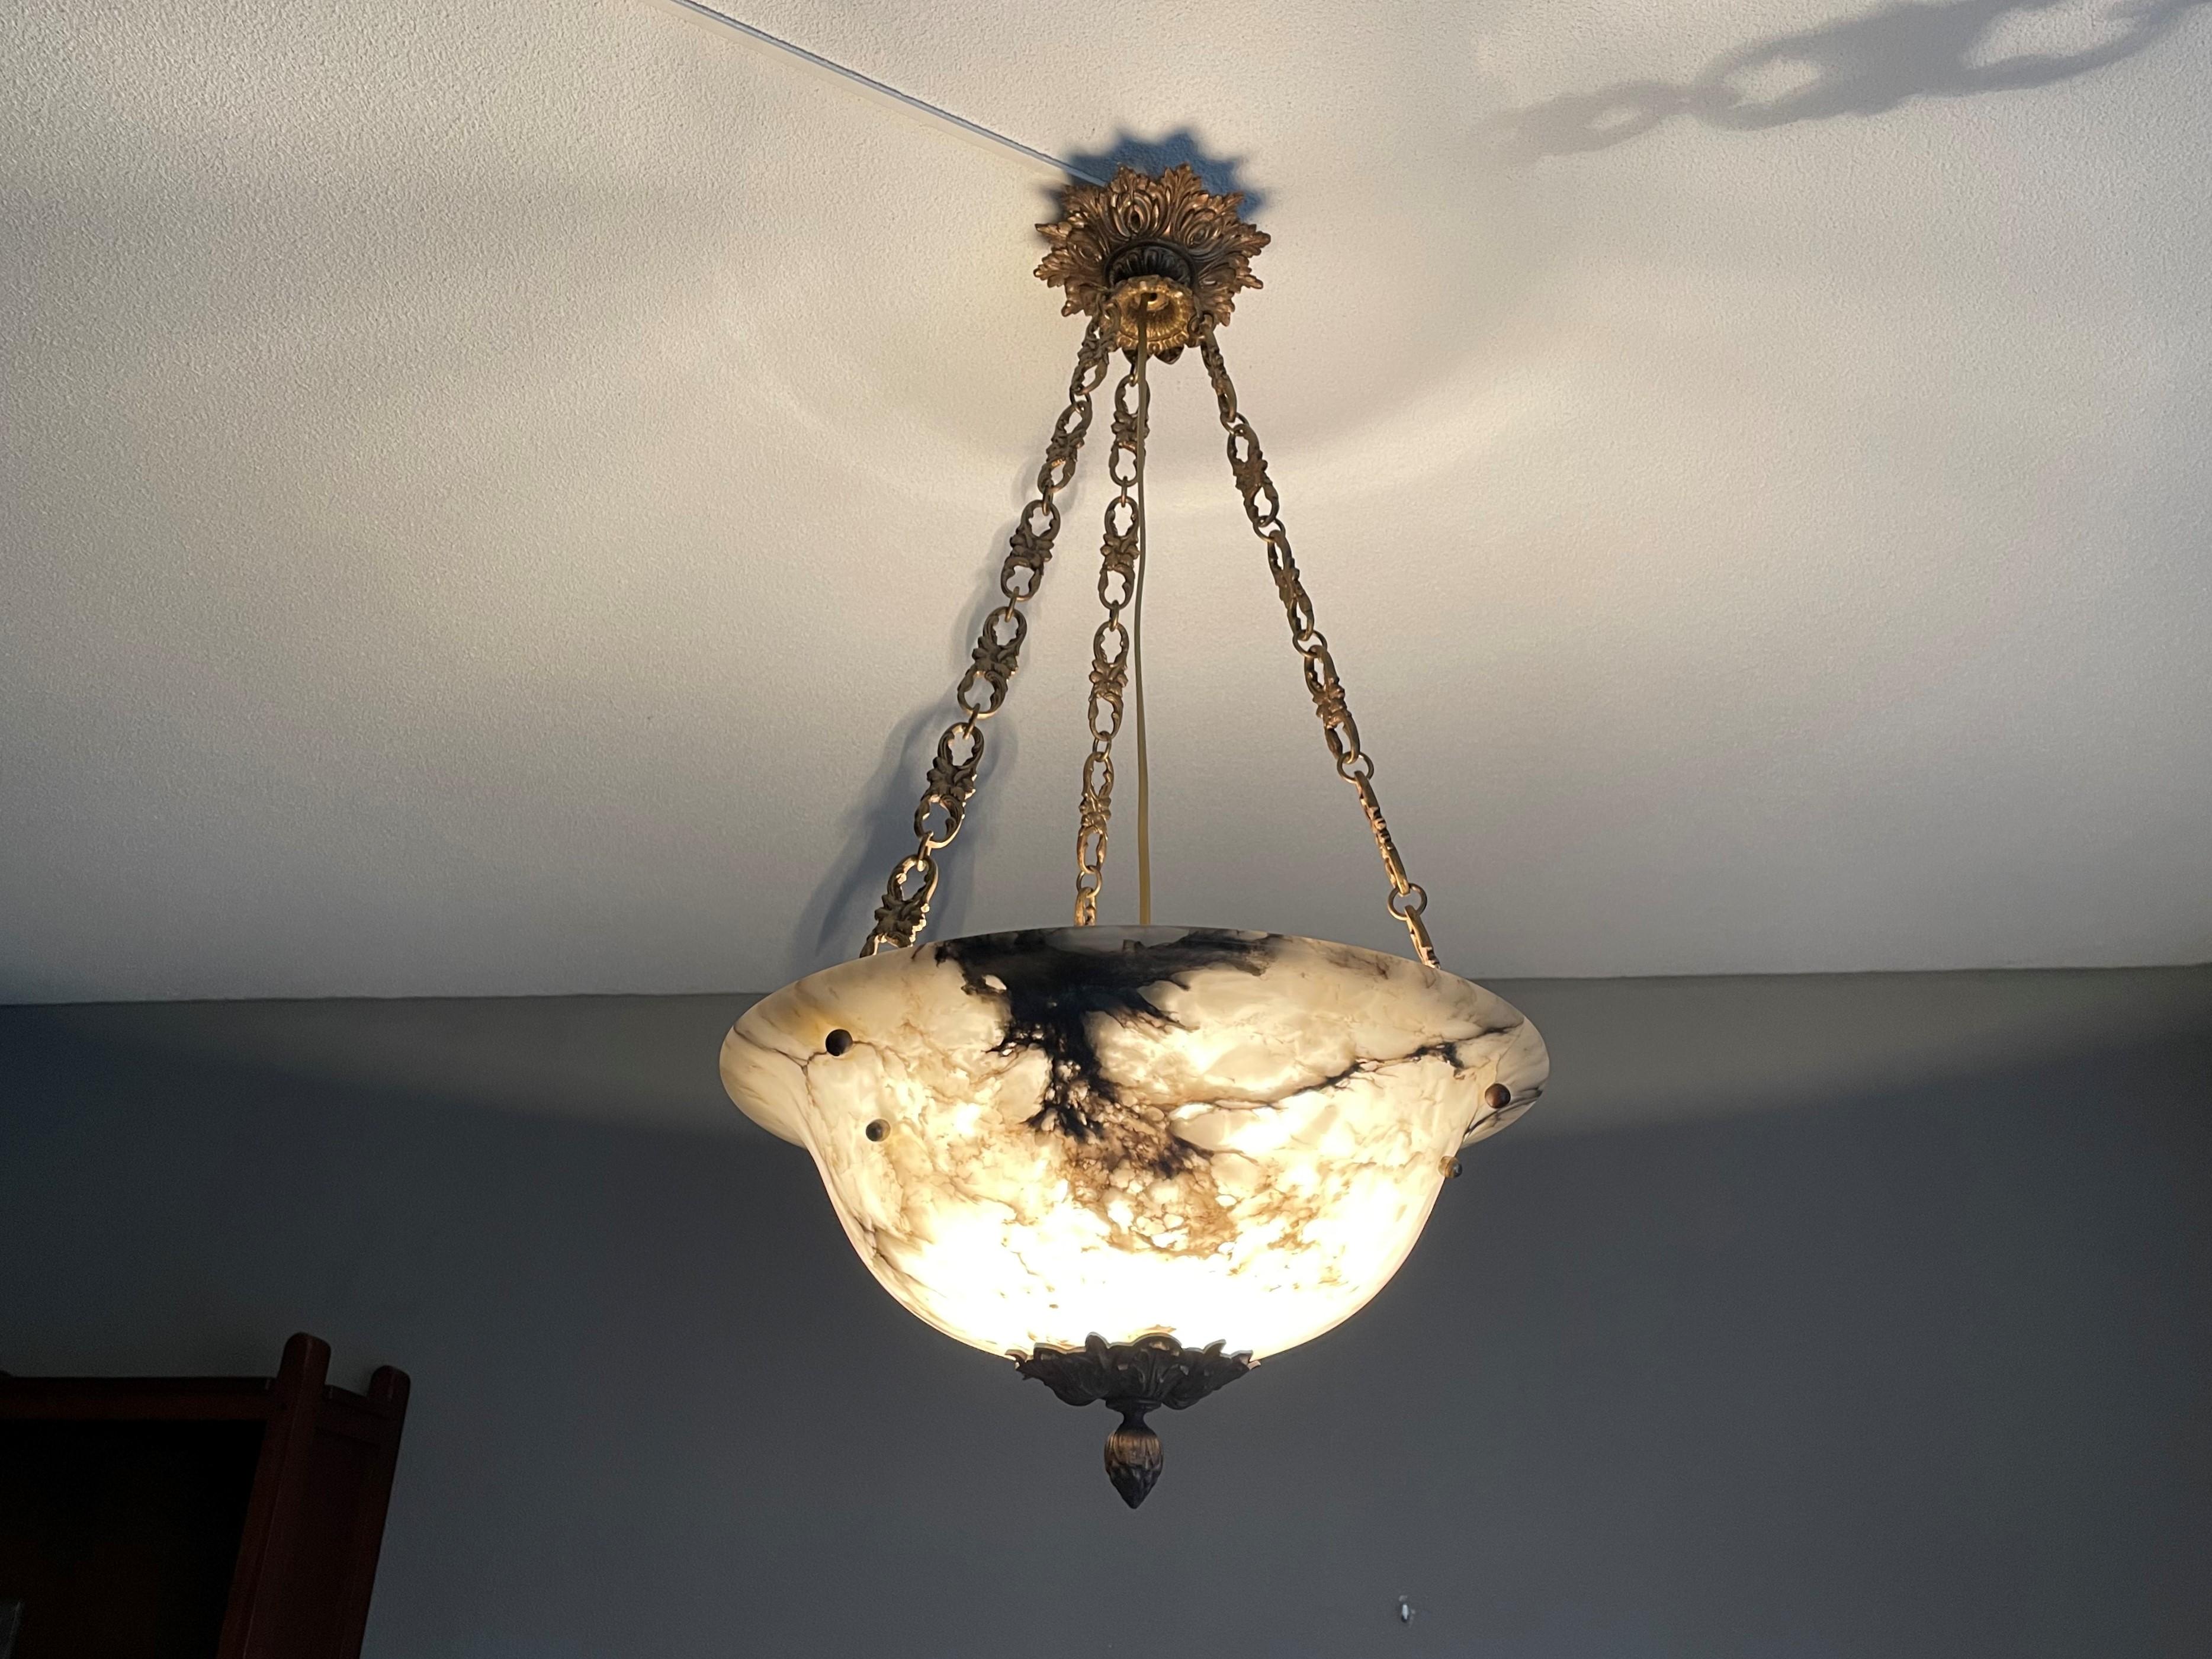 Antique French chandelier from a stately mansion.

If you are looking for a good size, beautiful and ready to use alabaster chandelier then this striking French specimen from circa 1900-1910 could be gracing your home soon. The combination of the